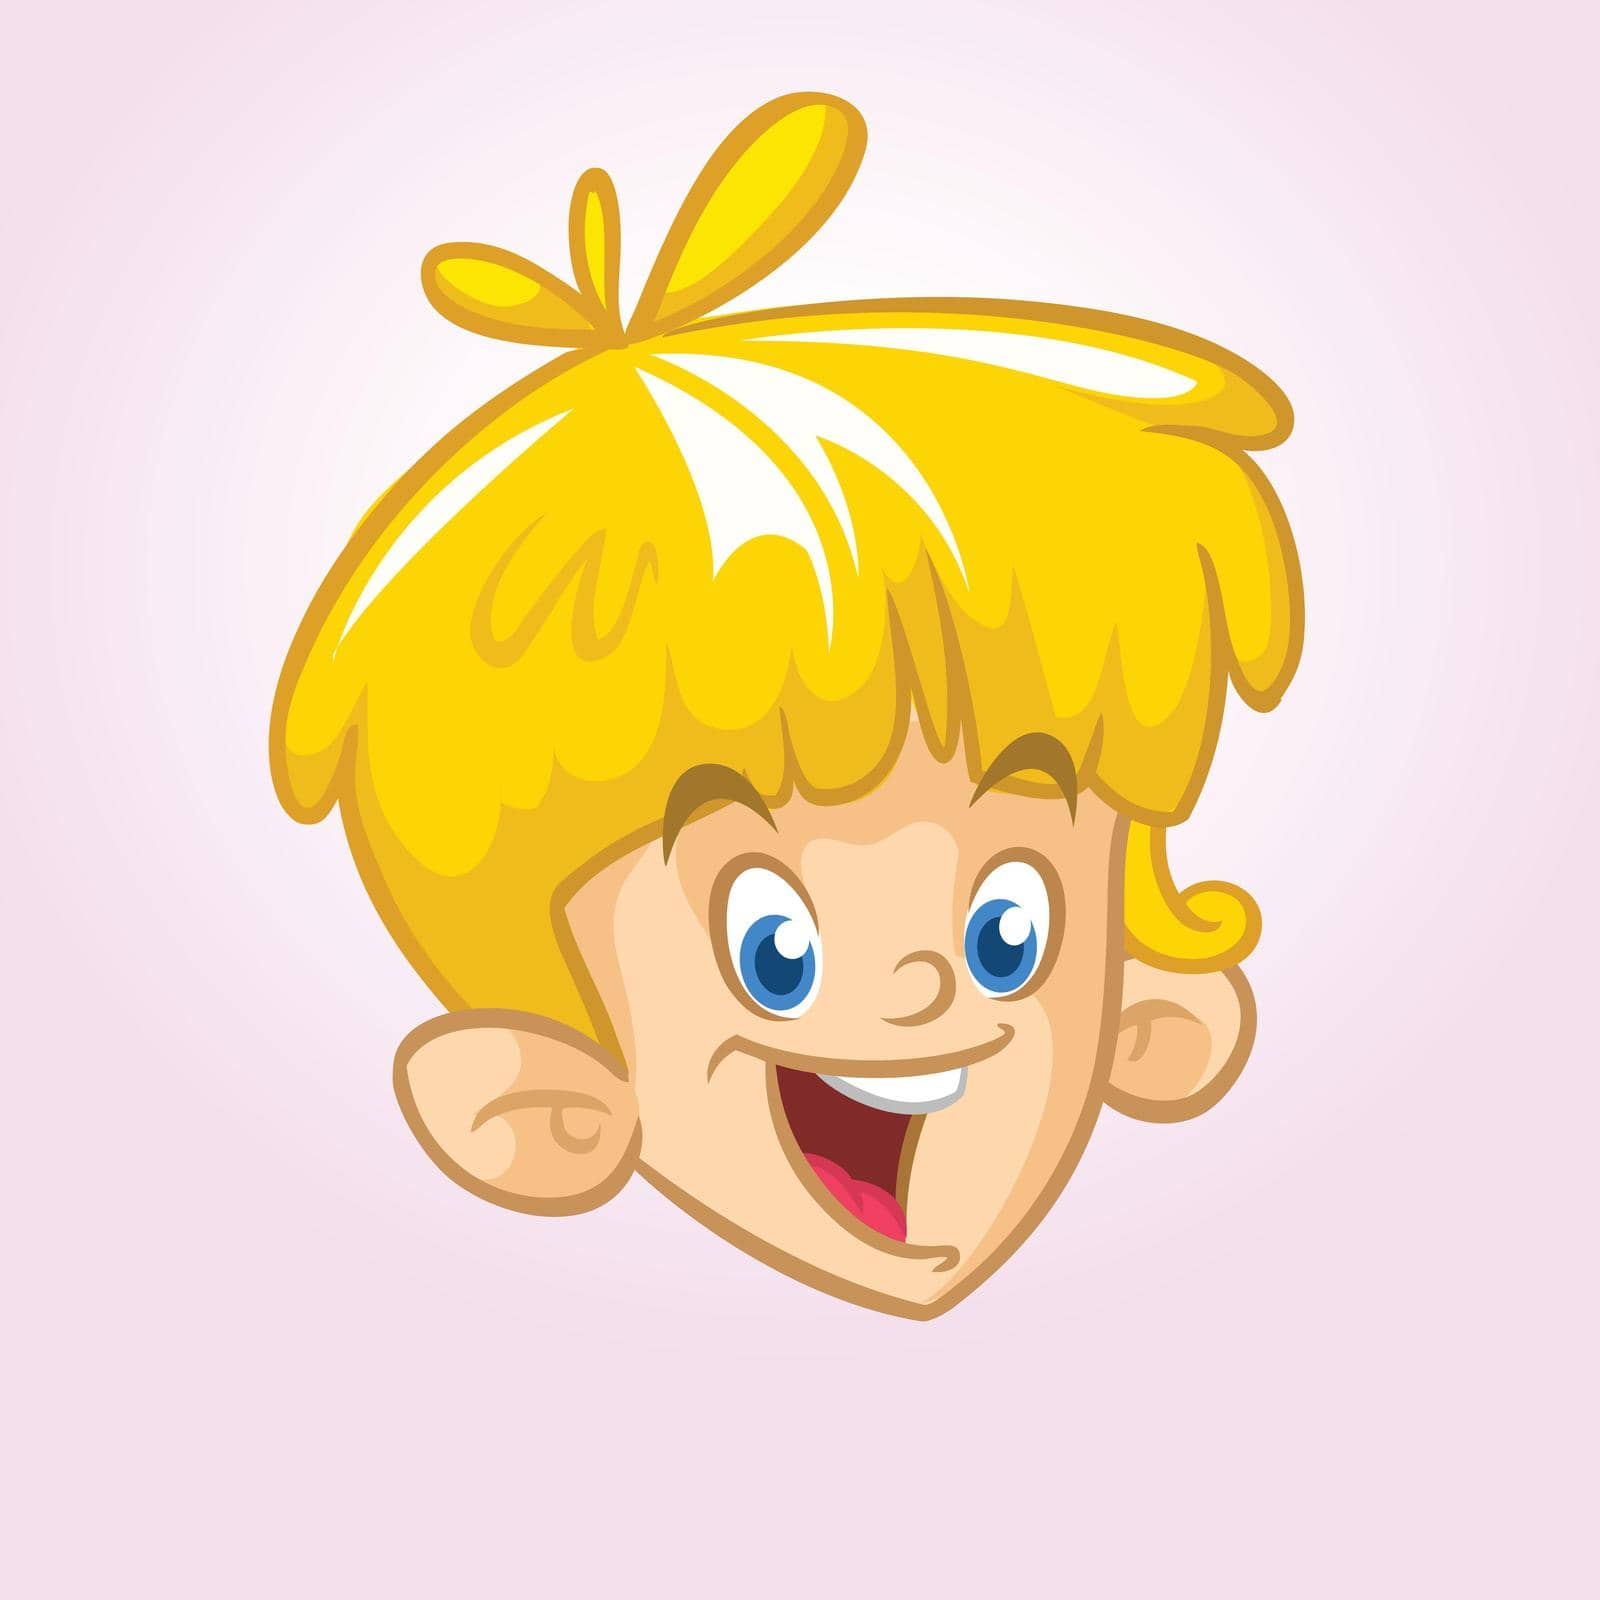 Cartoon small blond boy. Vector illustration of young teenager outlined. Boy head icon